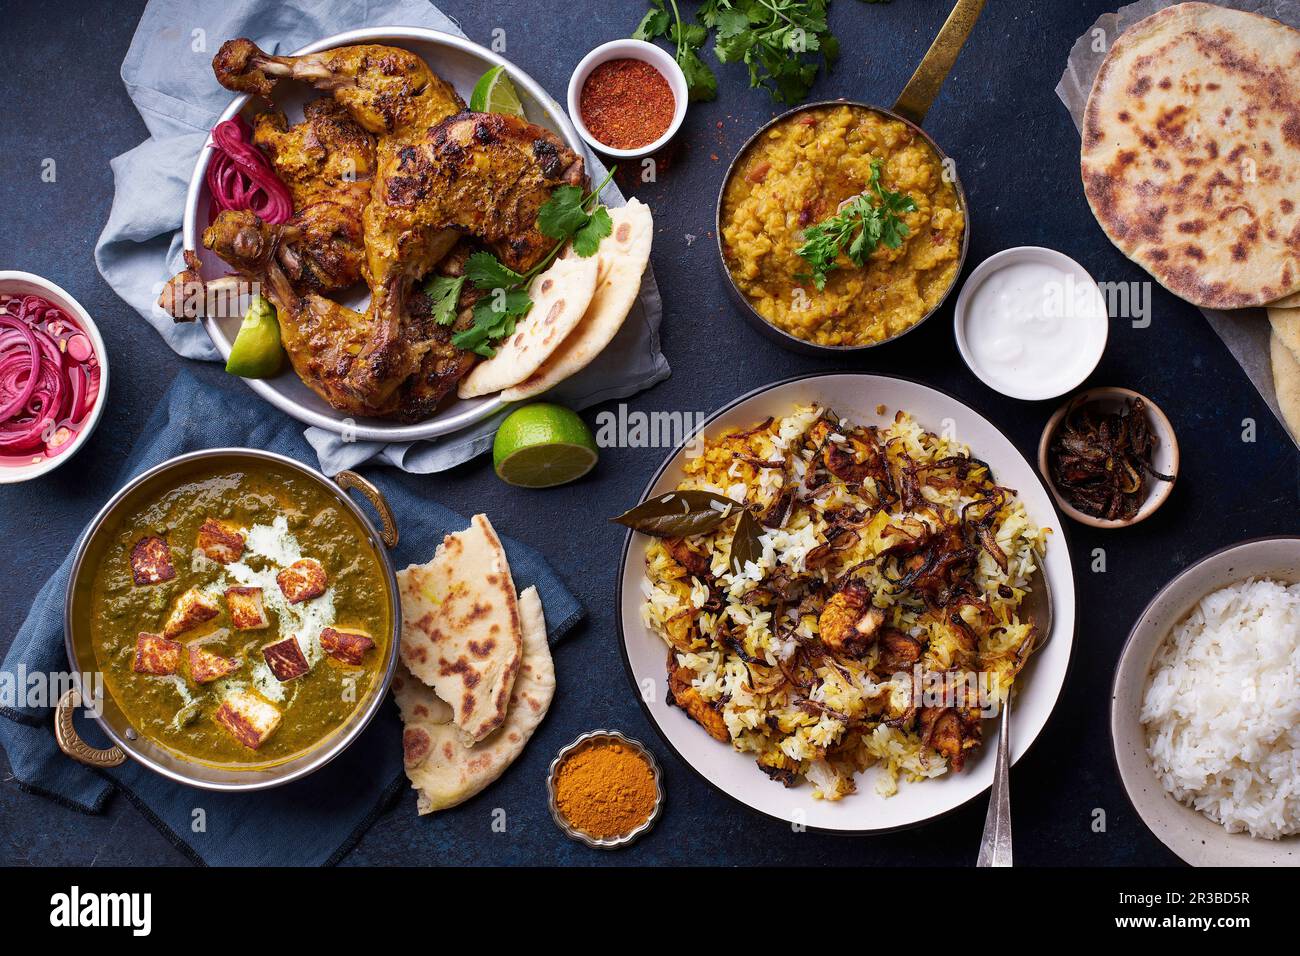 Various Indian dishes Stock Photo